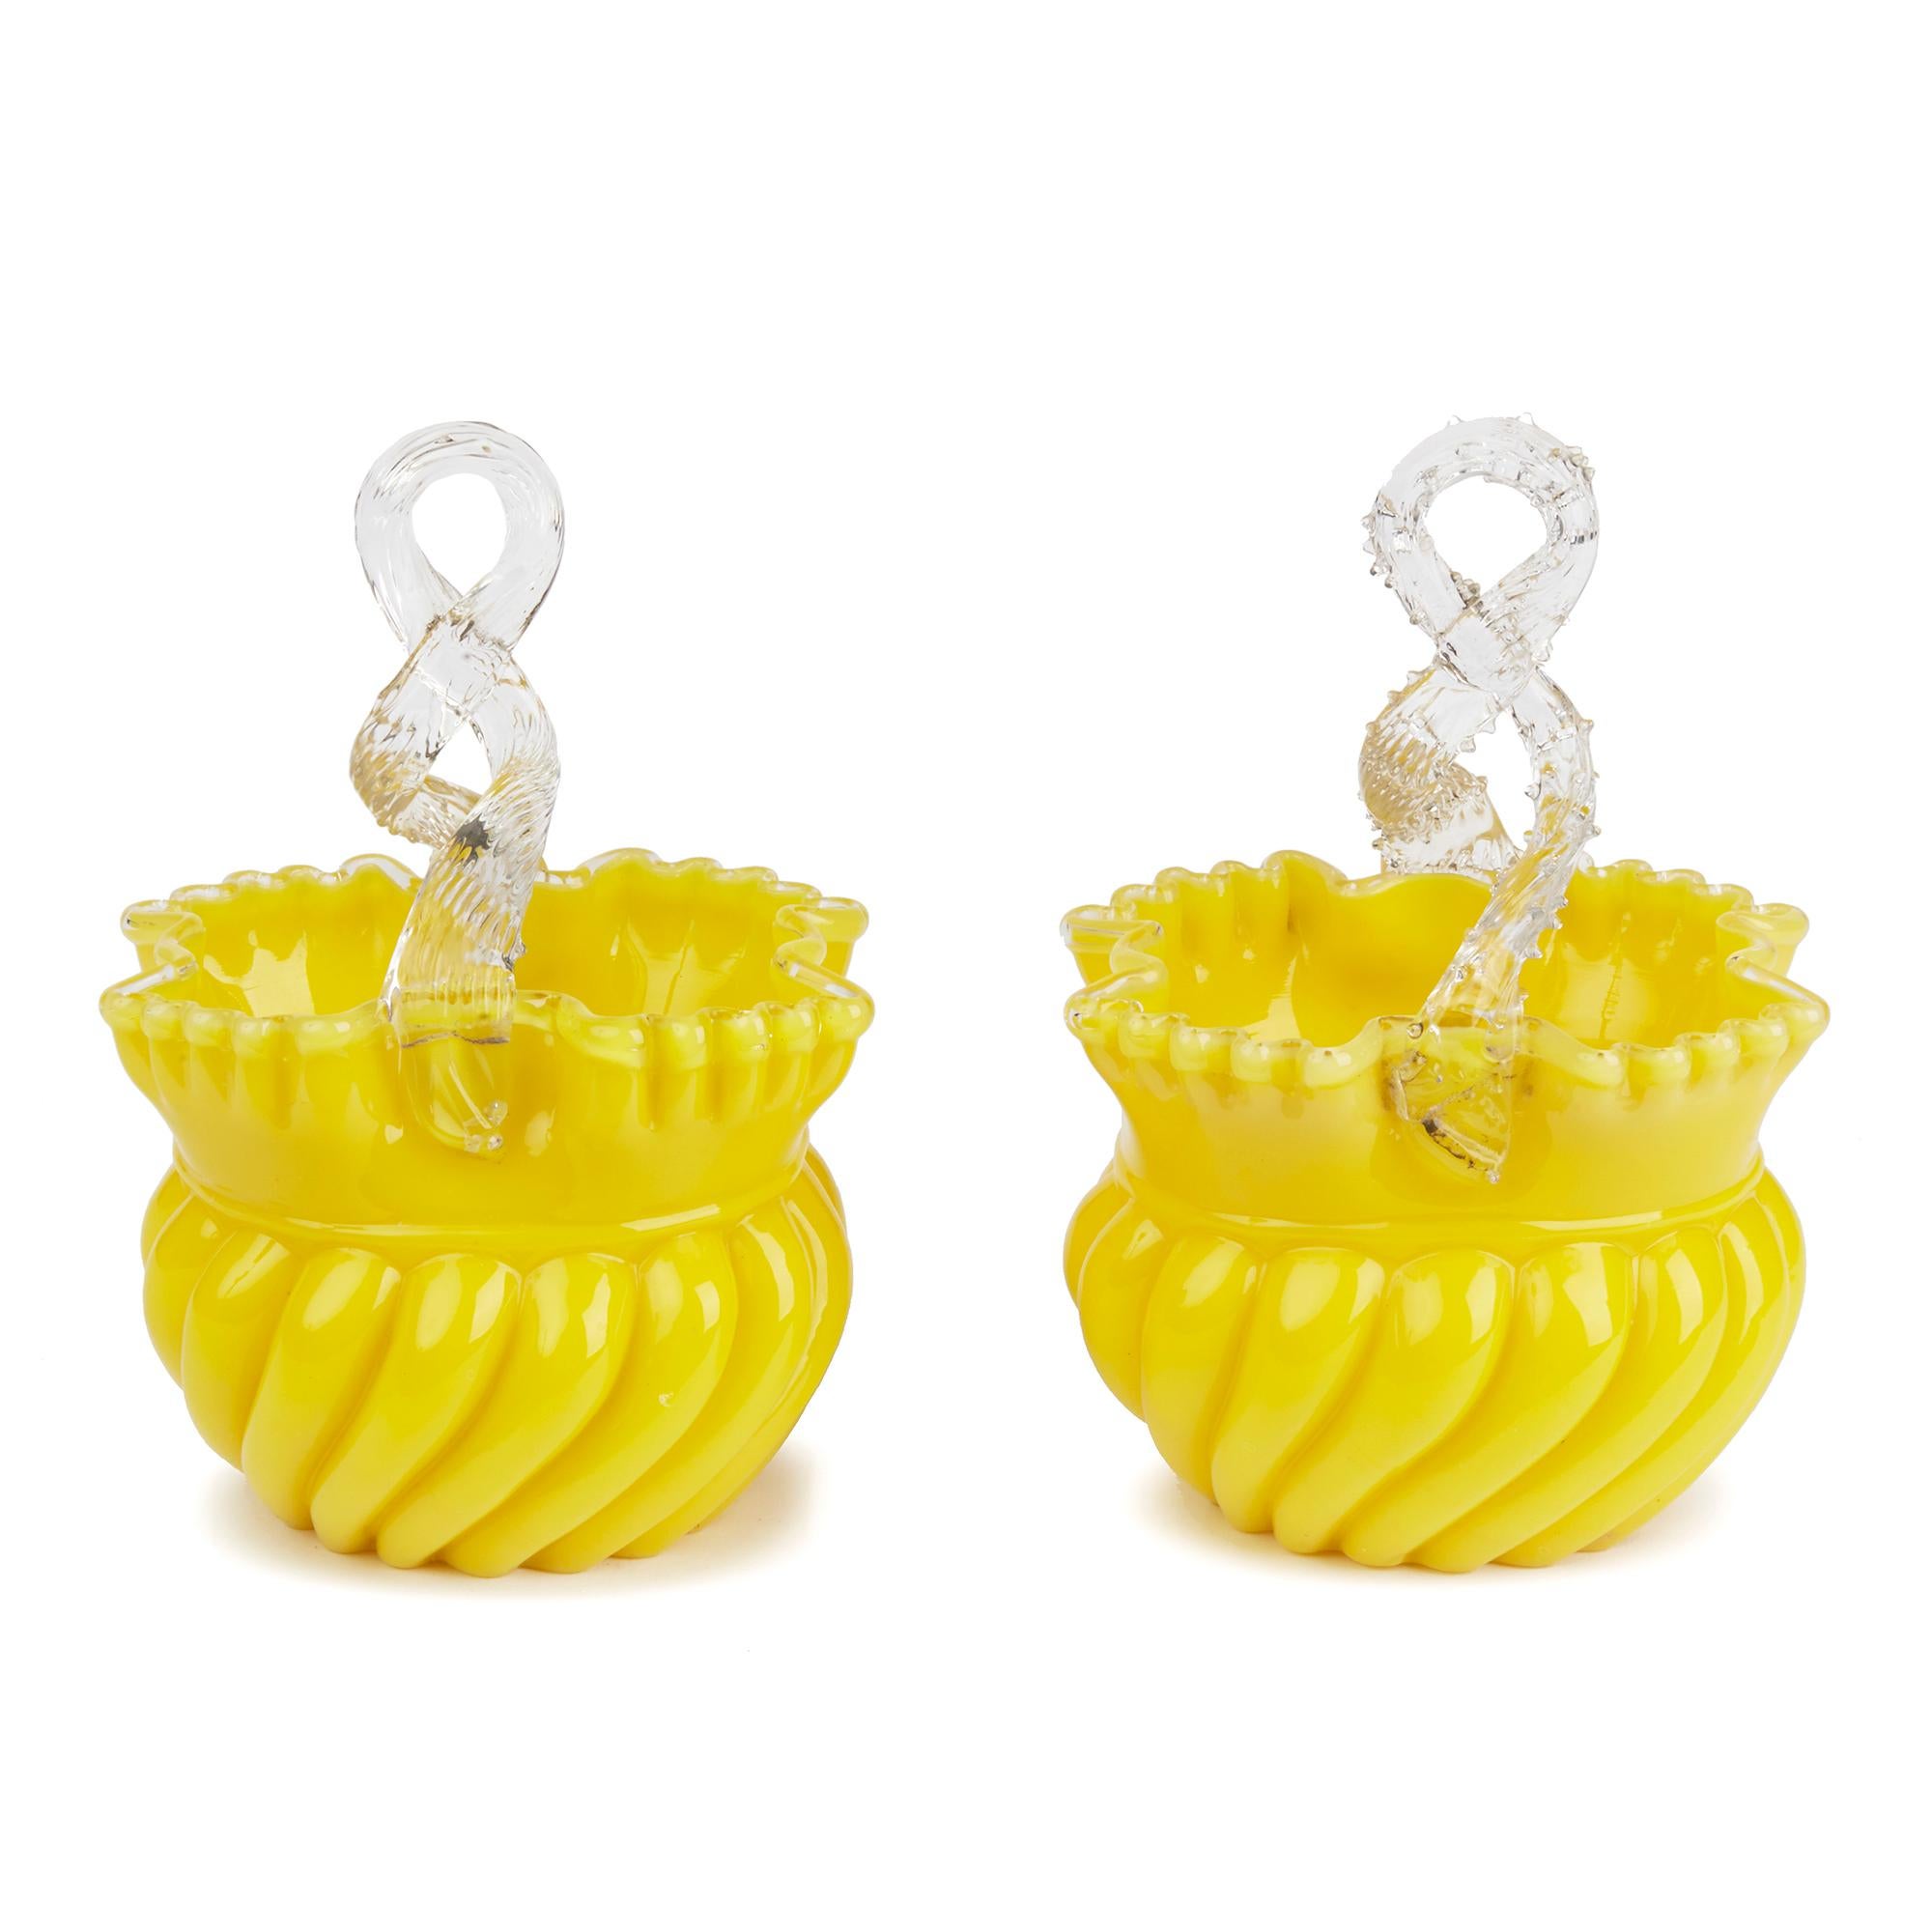 Late 19th Century Victorian English Pair of Yellow Glass Handled Posy Baskets For Sale